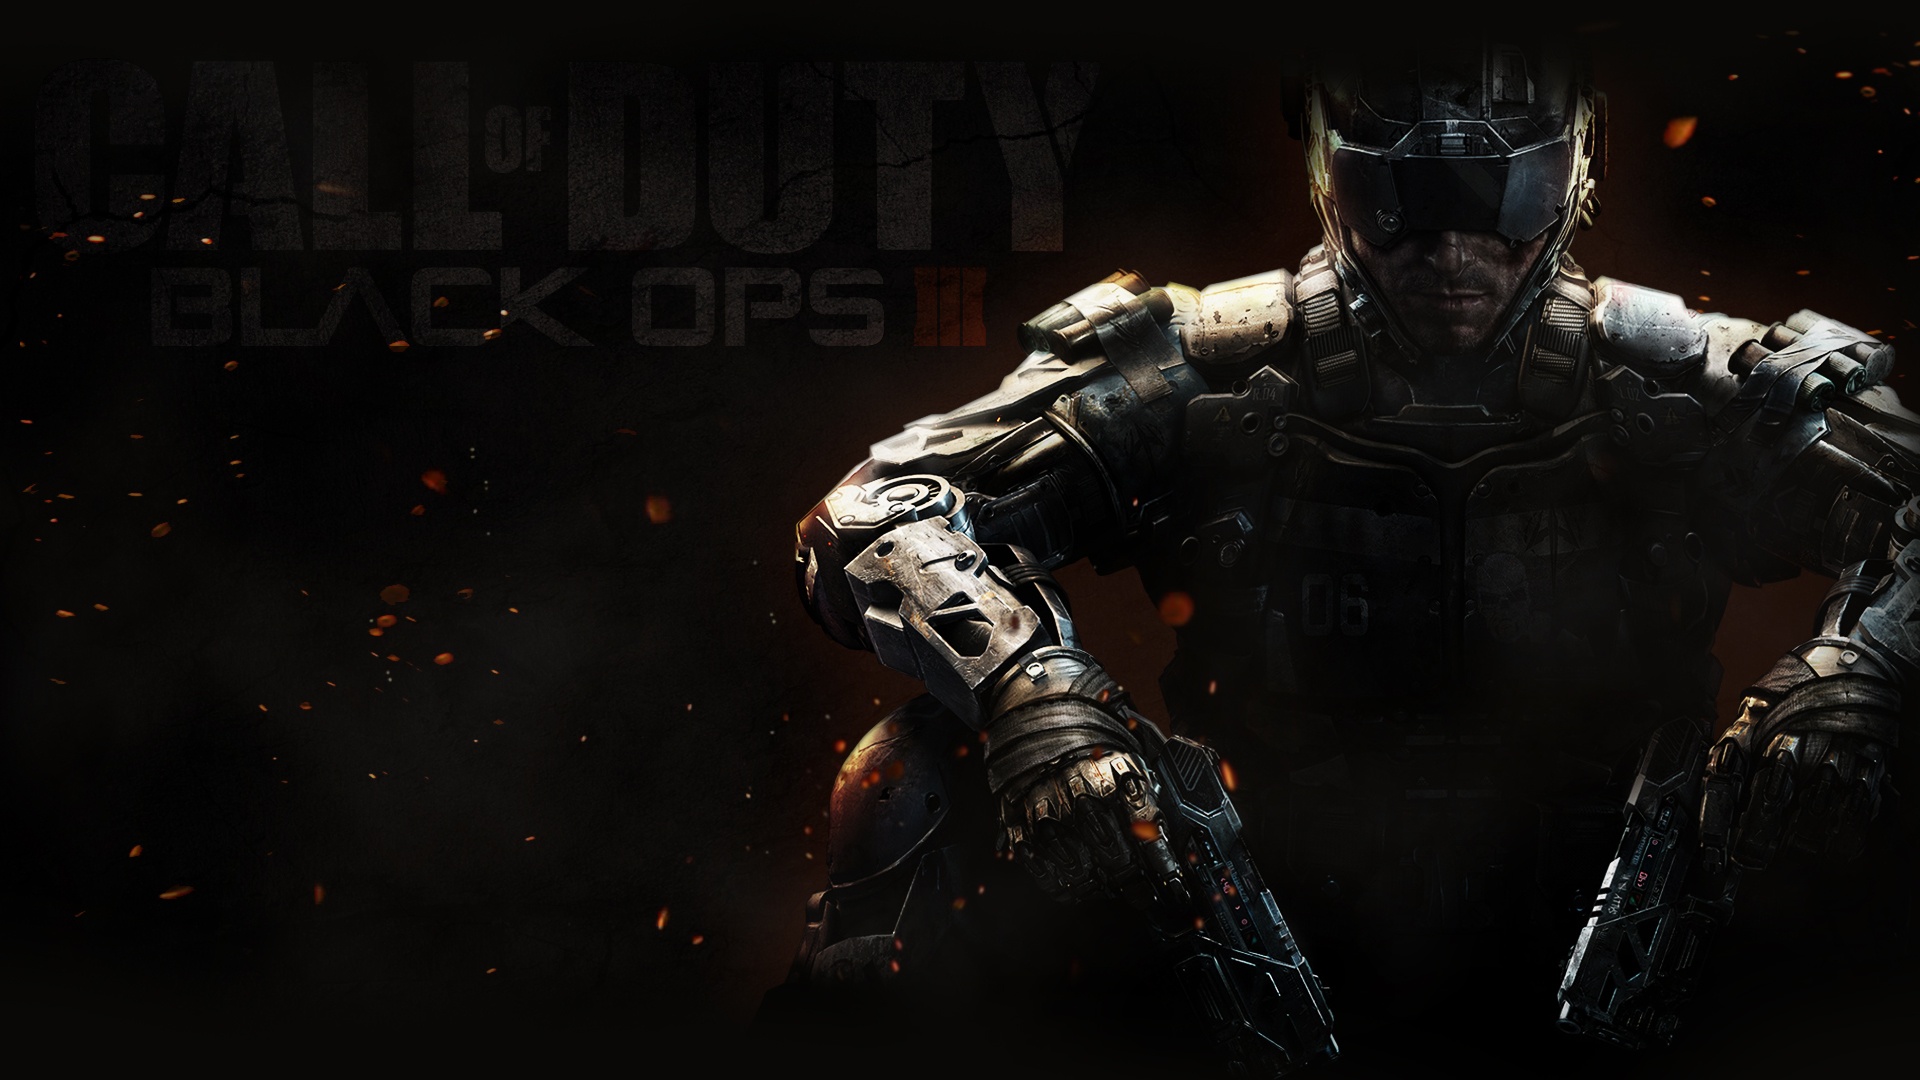 70+ Call of Duty: Black Ops III HD Wallpapers and Backgrounds